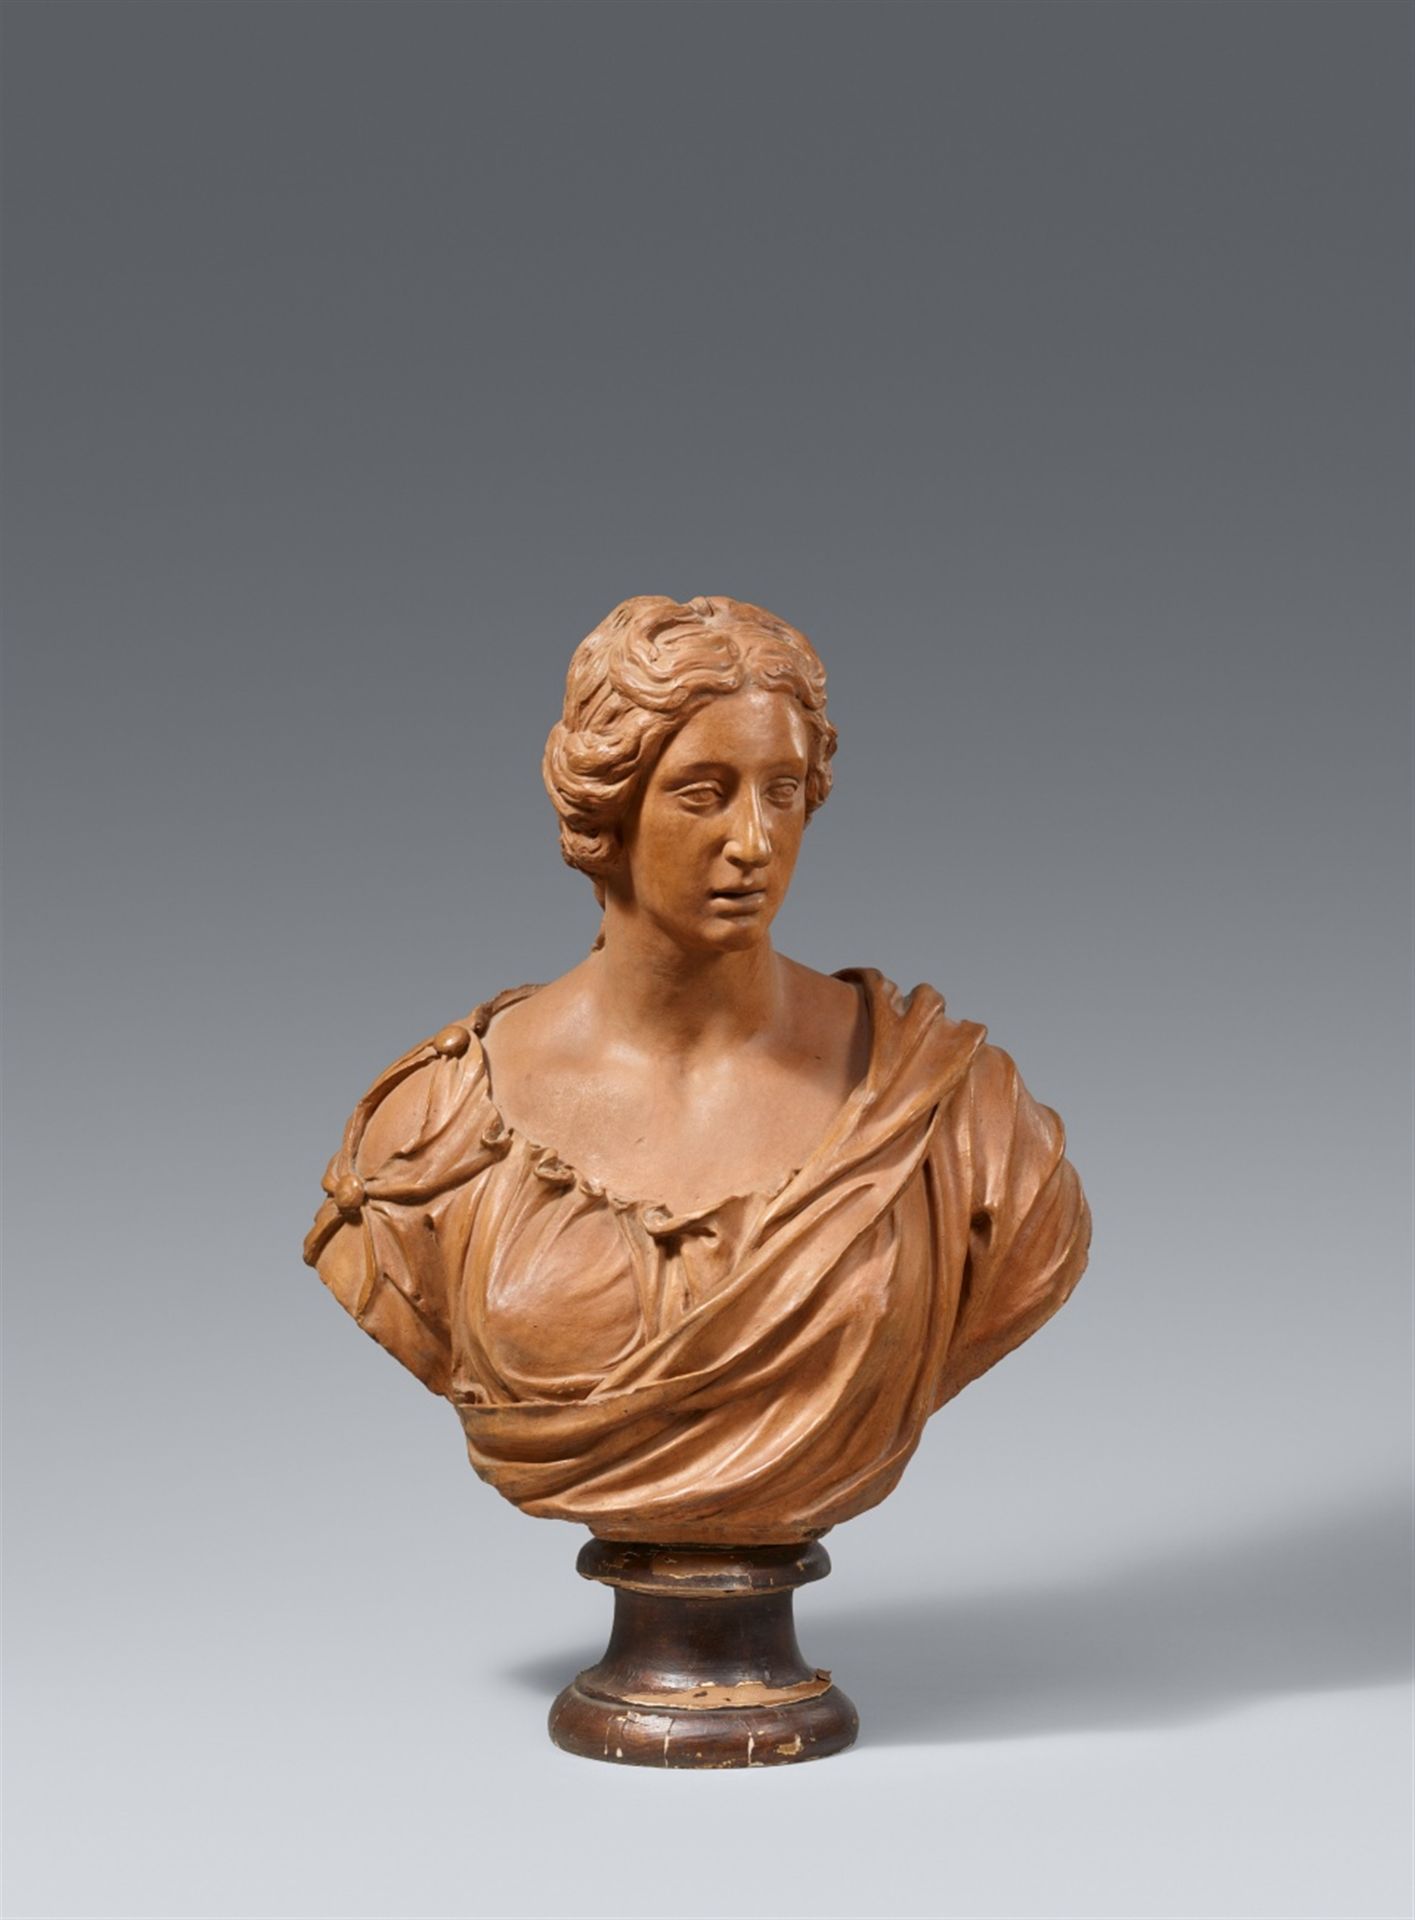 A terracotta bust of a woman “all´antica“ attributed to Giovacchino Fortini